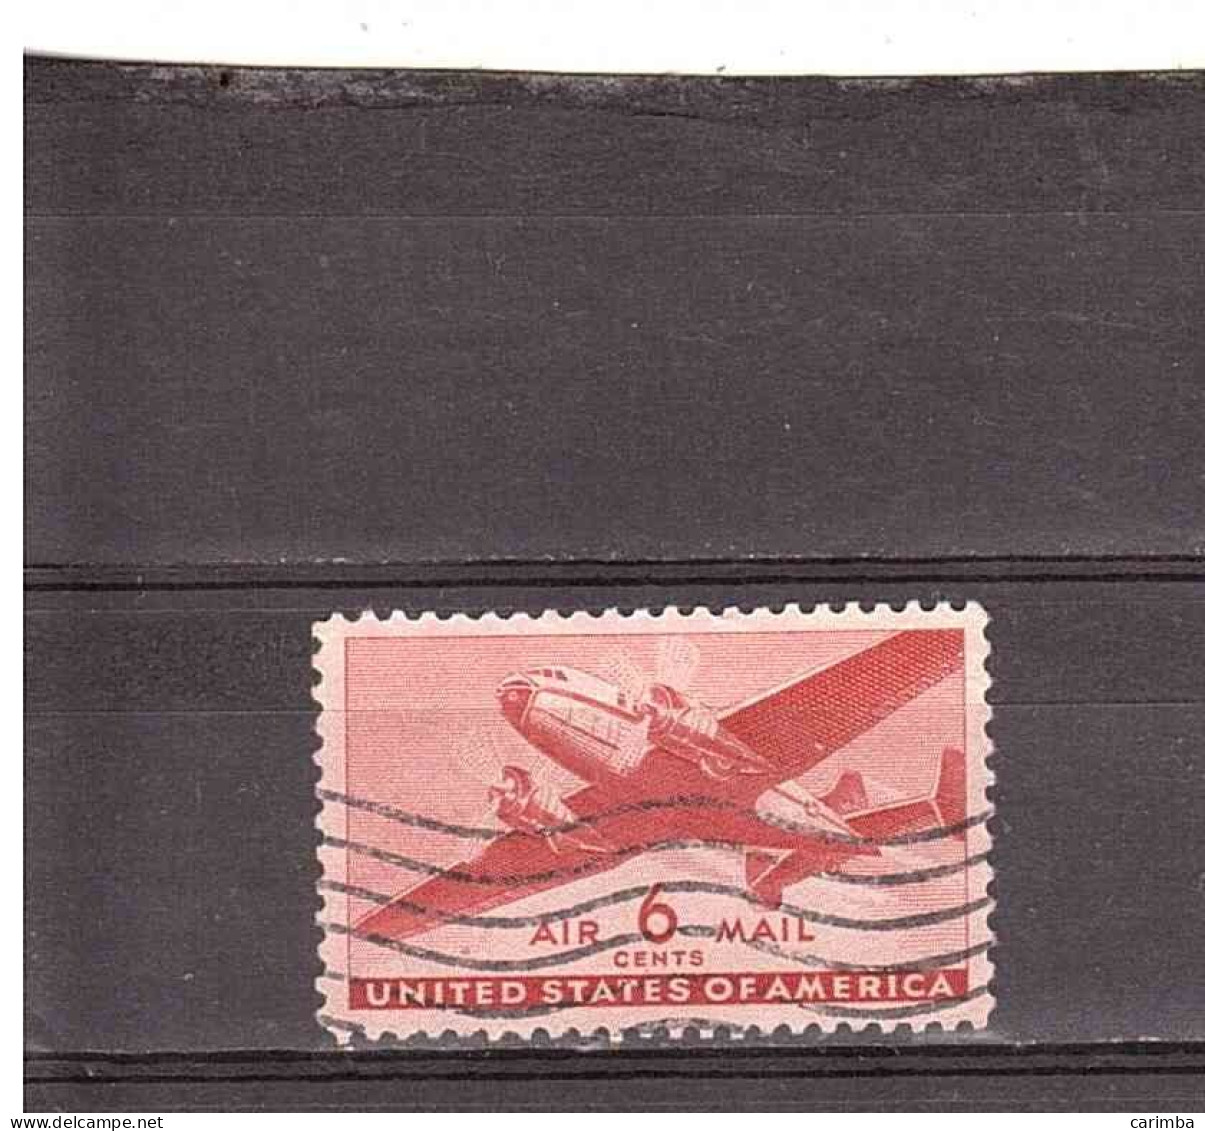 AIR MAIL 6 CENTS - 2a. 1941-1960 Usados